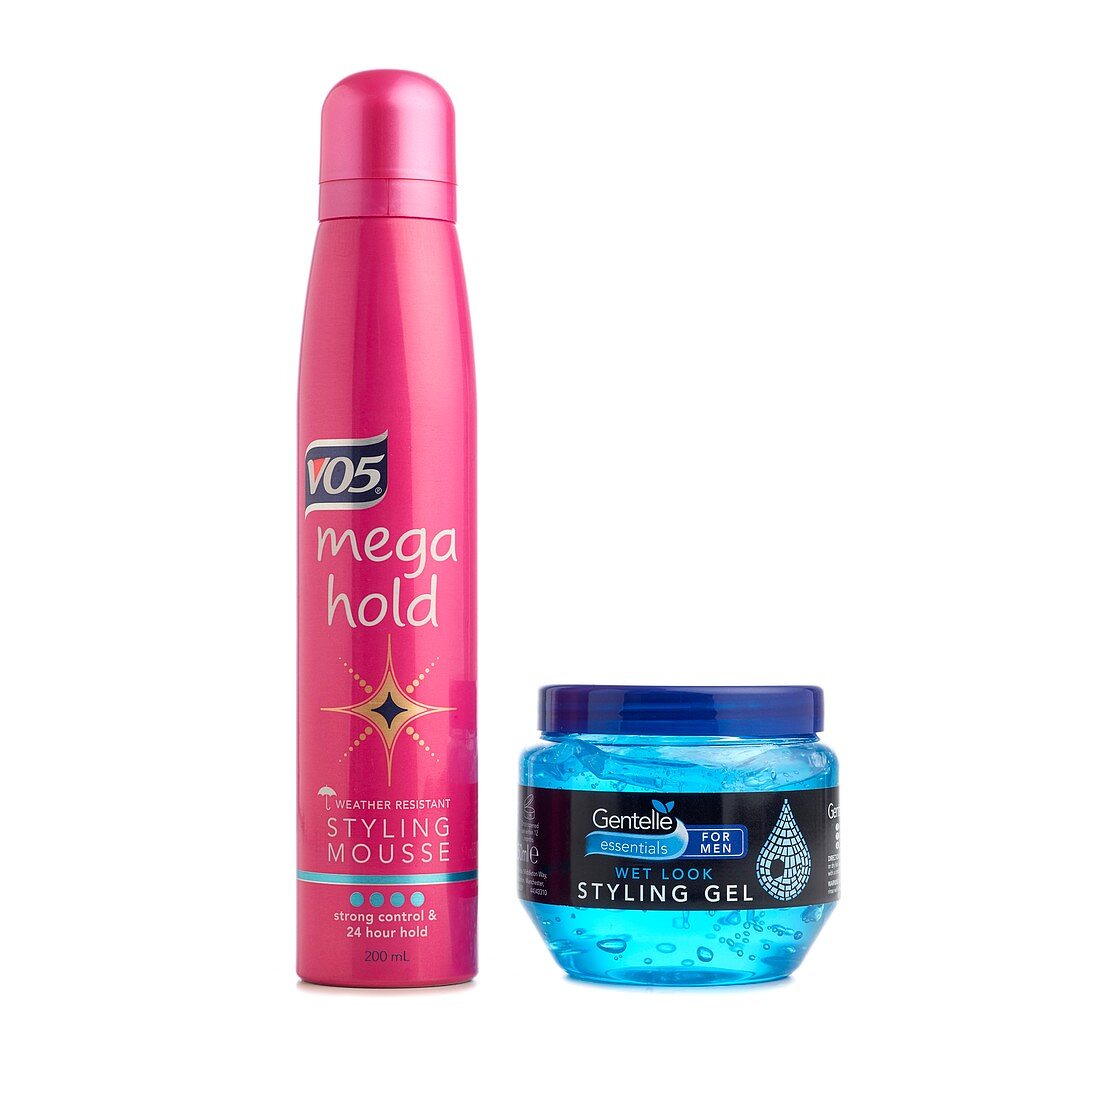 Hair mousse and gel